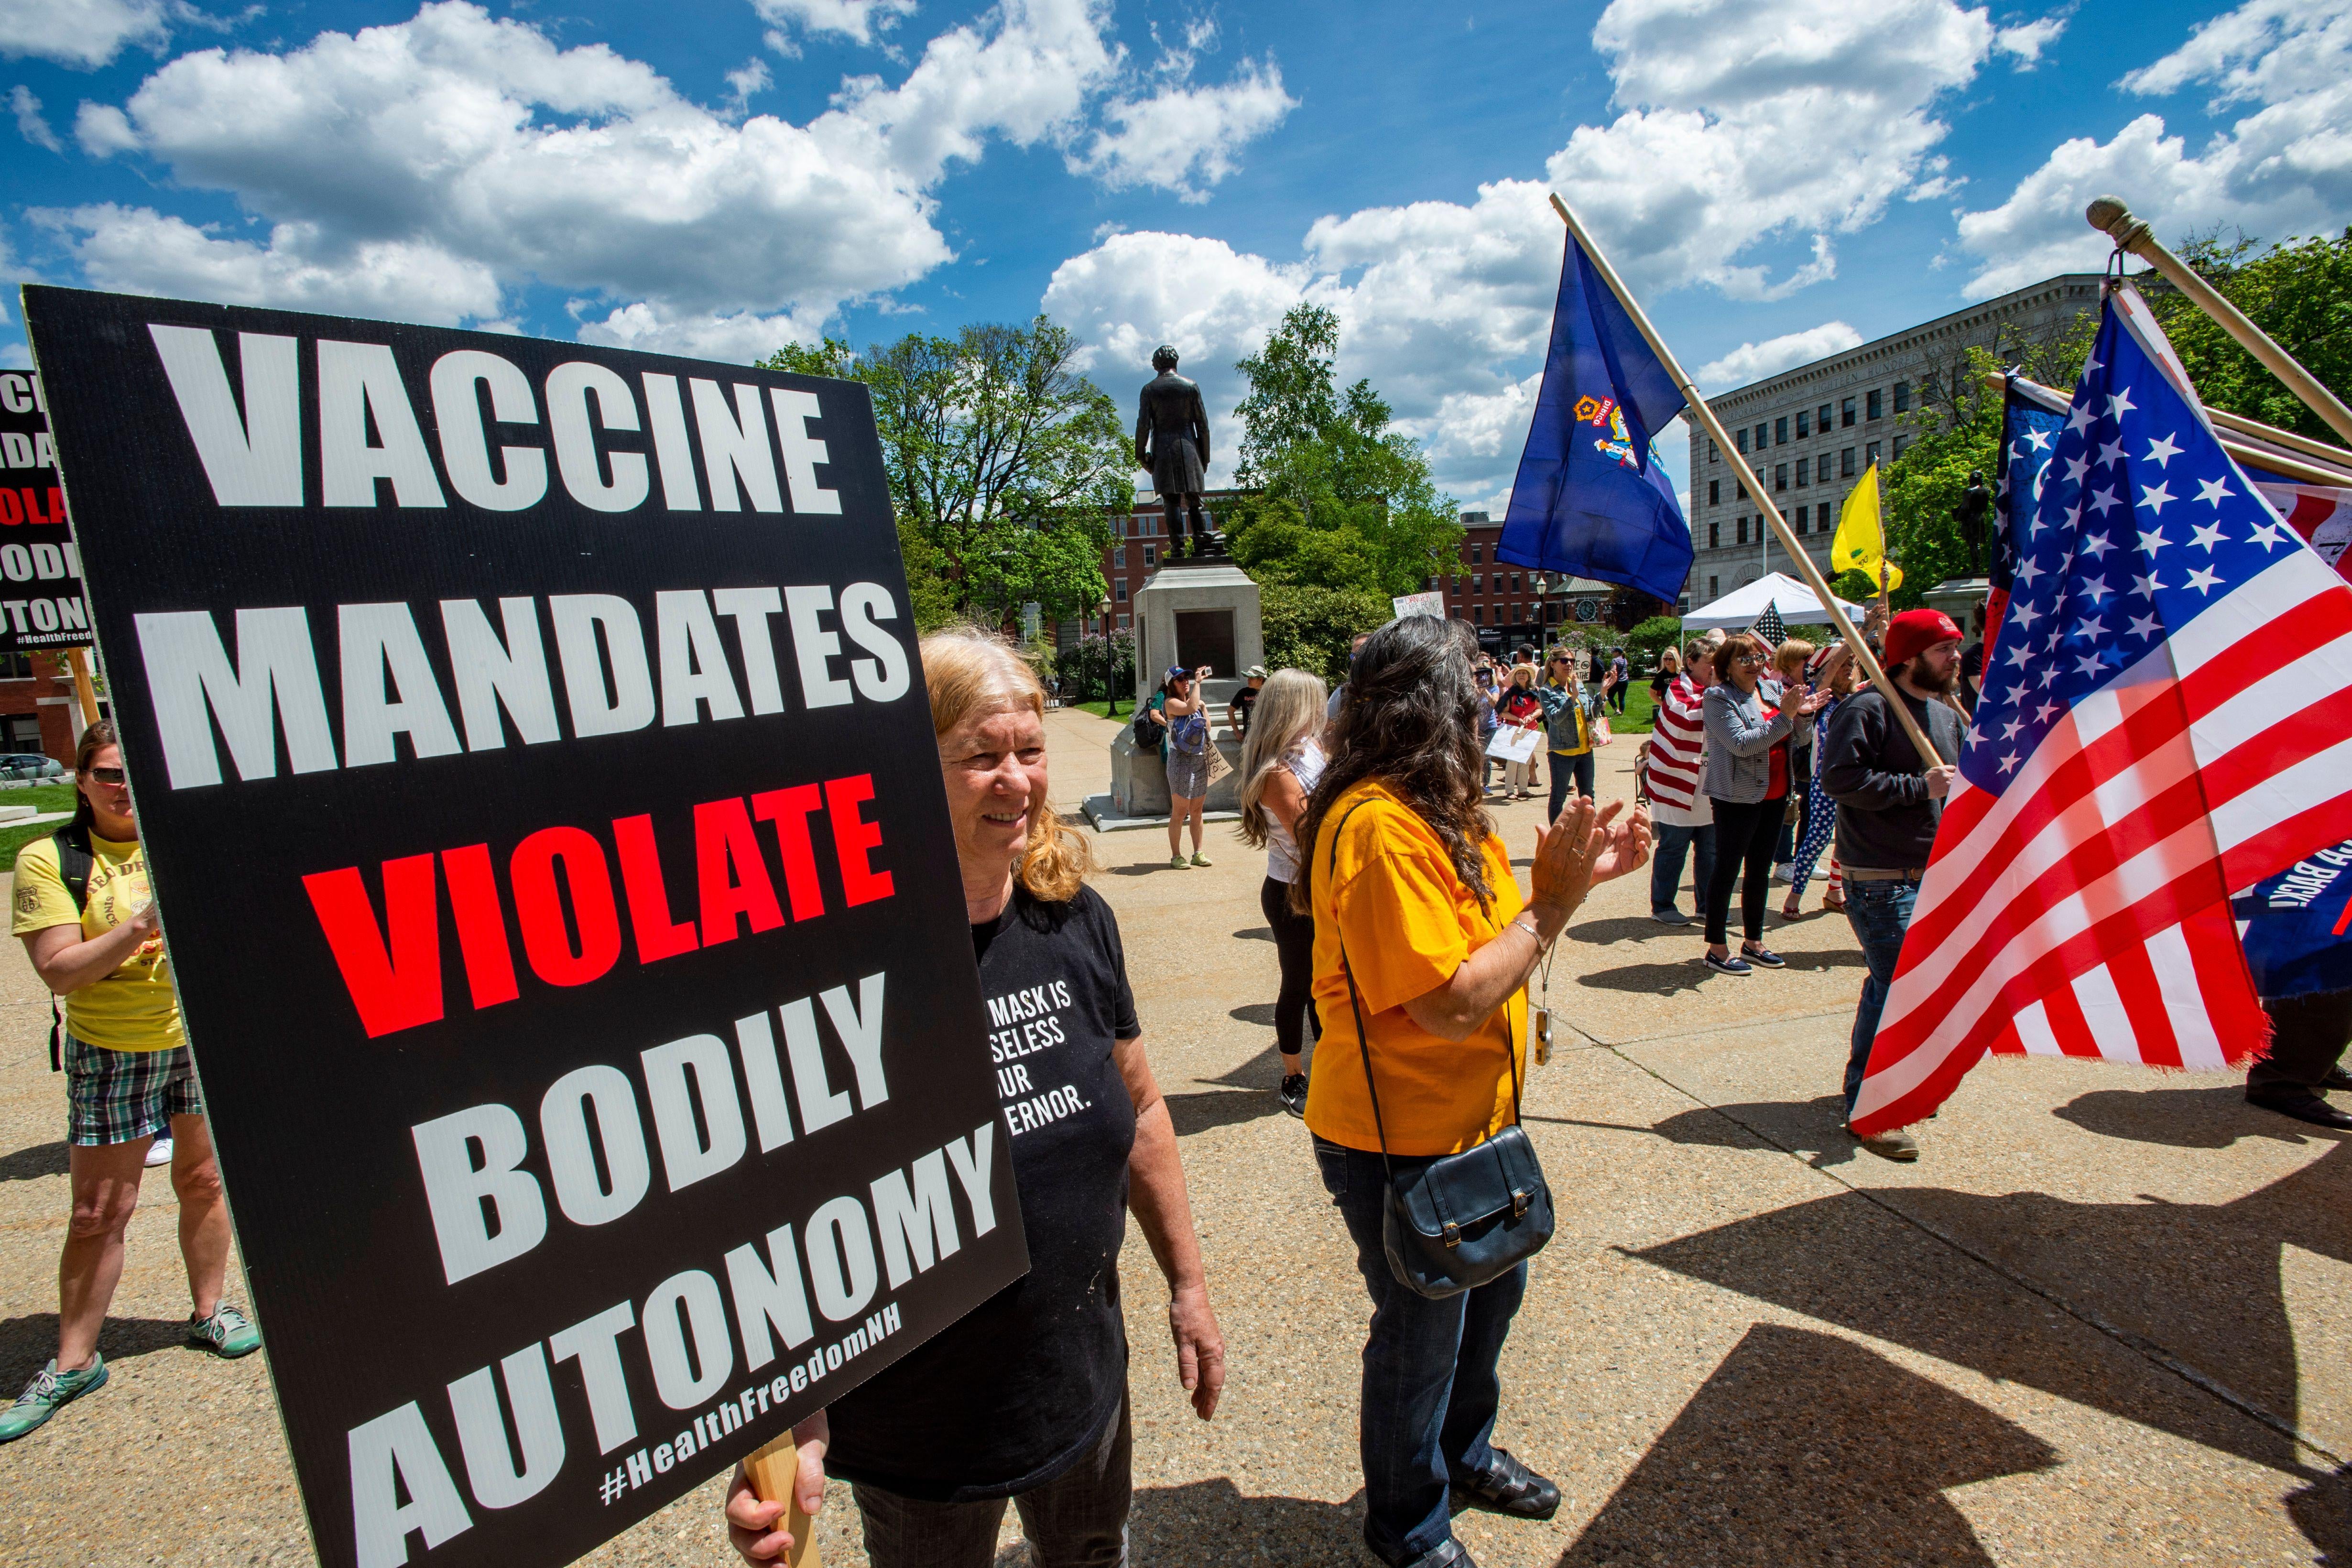 A woman holds a sign that says, "VACCINE MANDATES VIOLATE BODILY AUTONOMY."